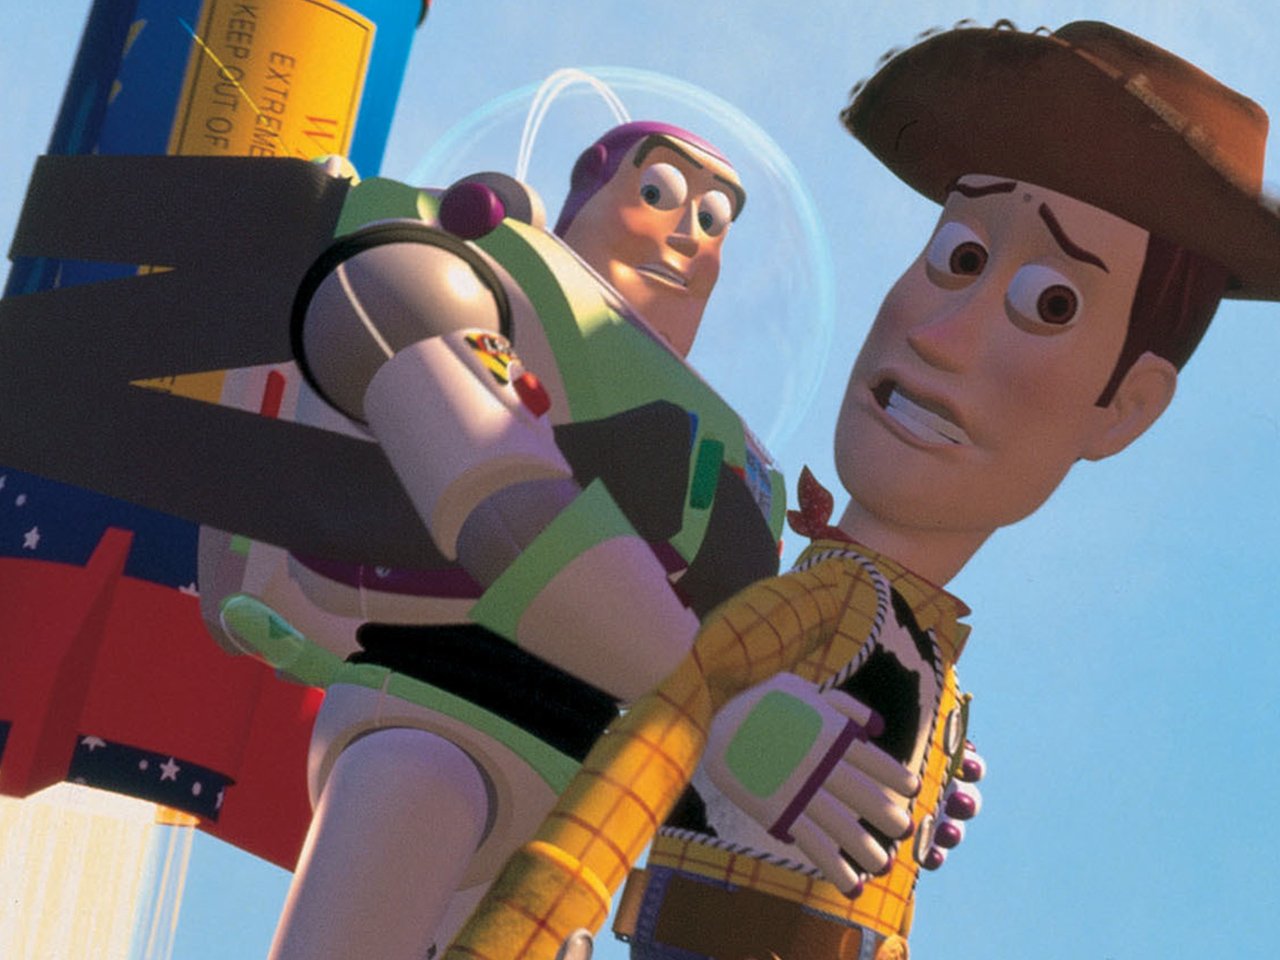 A still from the kids' animated movie Toy Story